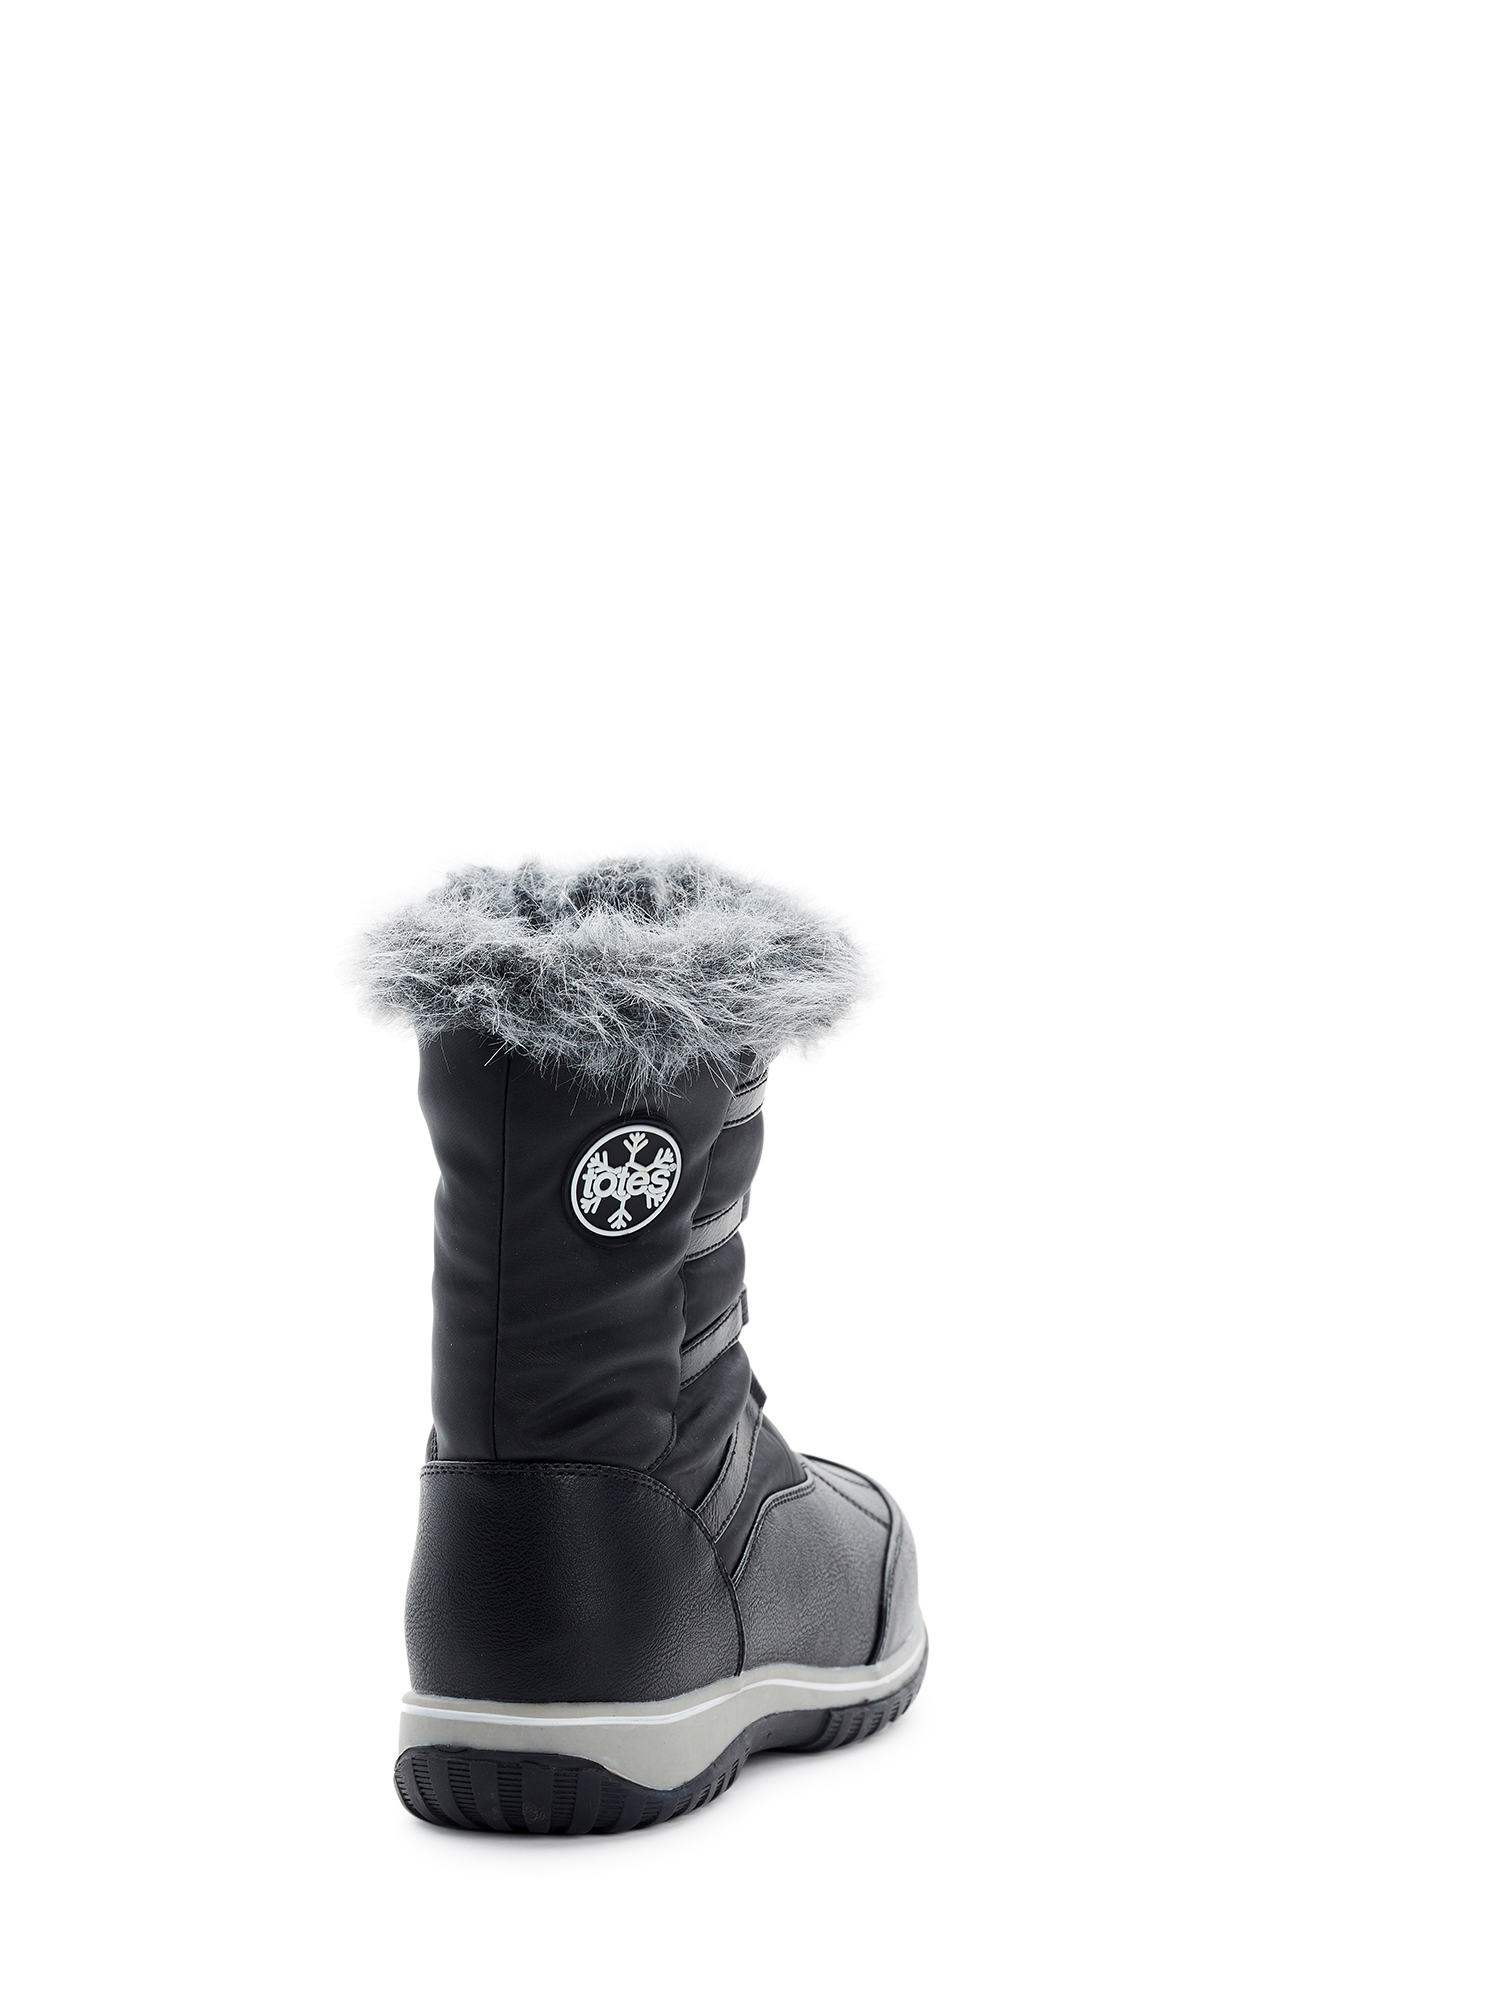 Totes Women's Adele Lace Up Waterproof Faux Shearling Winter Boots, Sizes  6-11